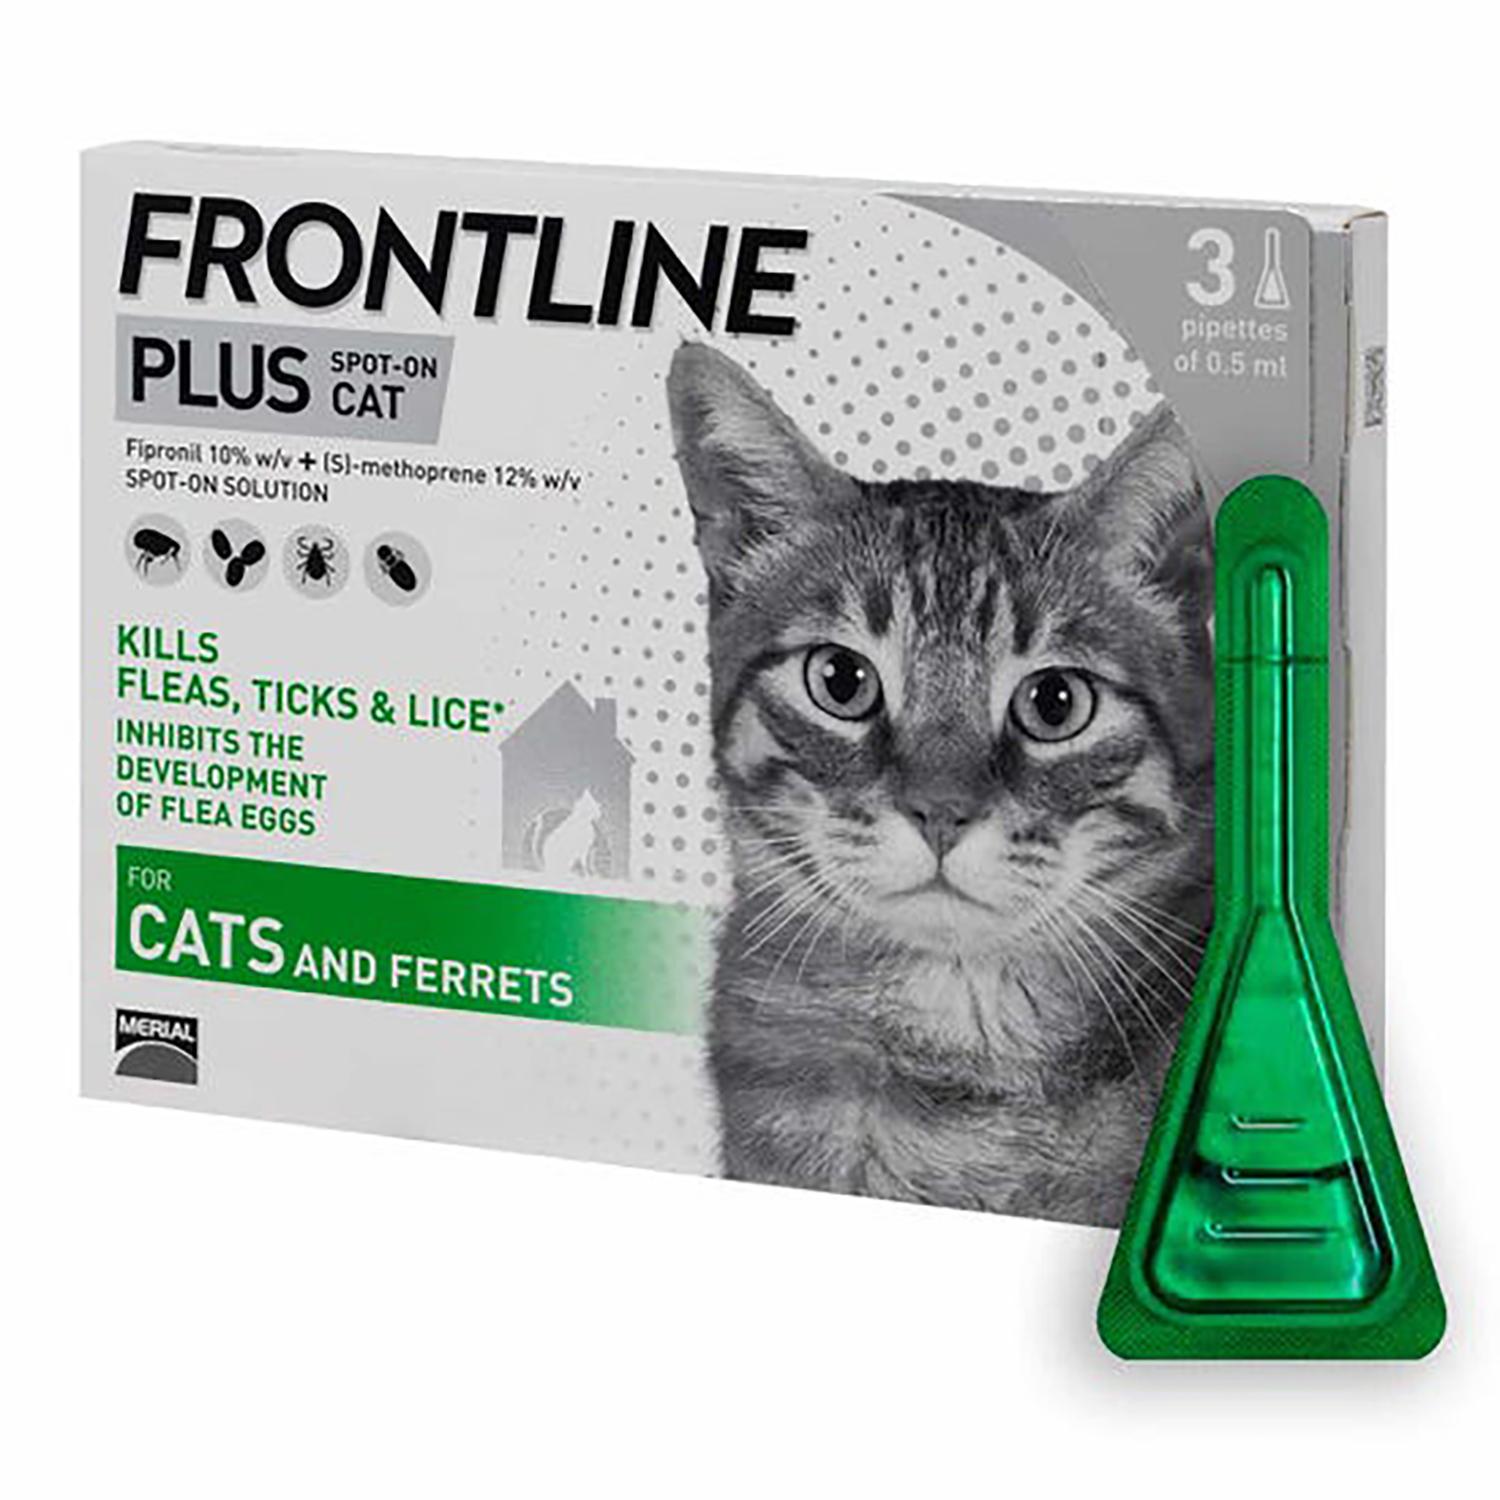 Buy Frontline Plus Spot On Cat Pack of 3 from Fane Valley Stores